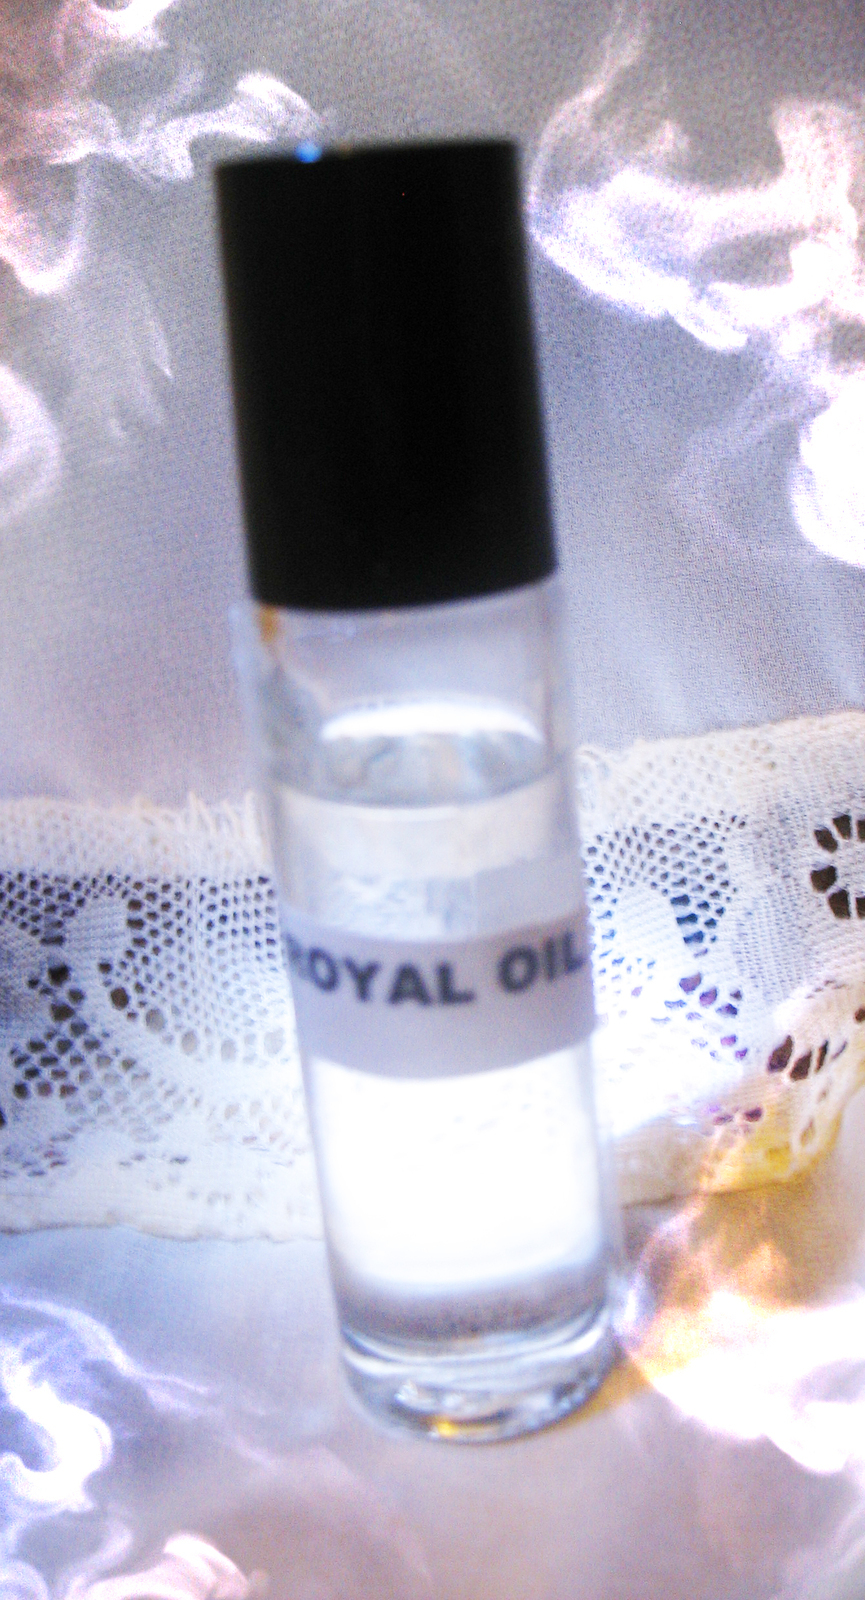 FREE W $49 Haunted BLESSED ROYAL OIL POTION ASCEND TO HIGHER FREQUENCY MAGICK  - Freebie